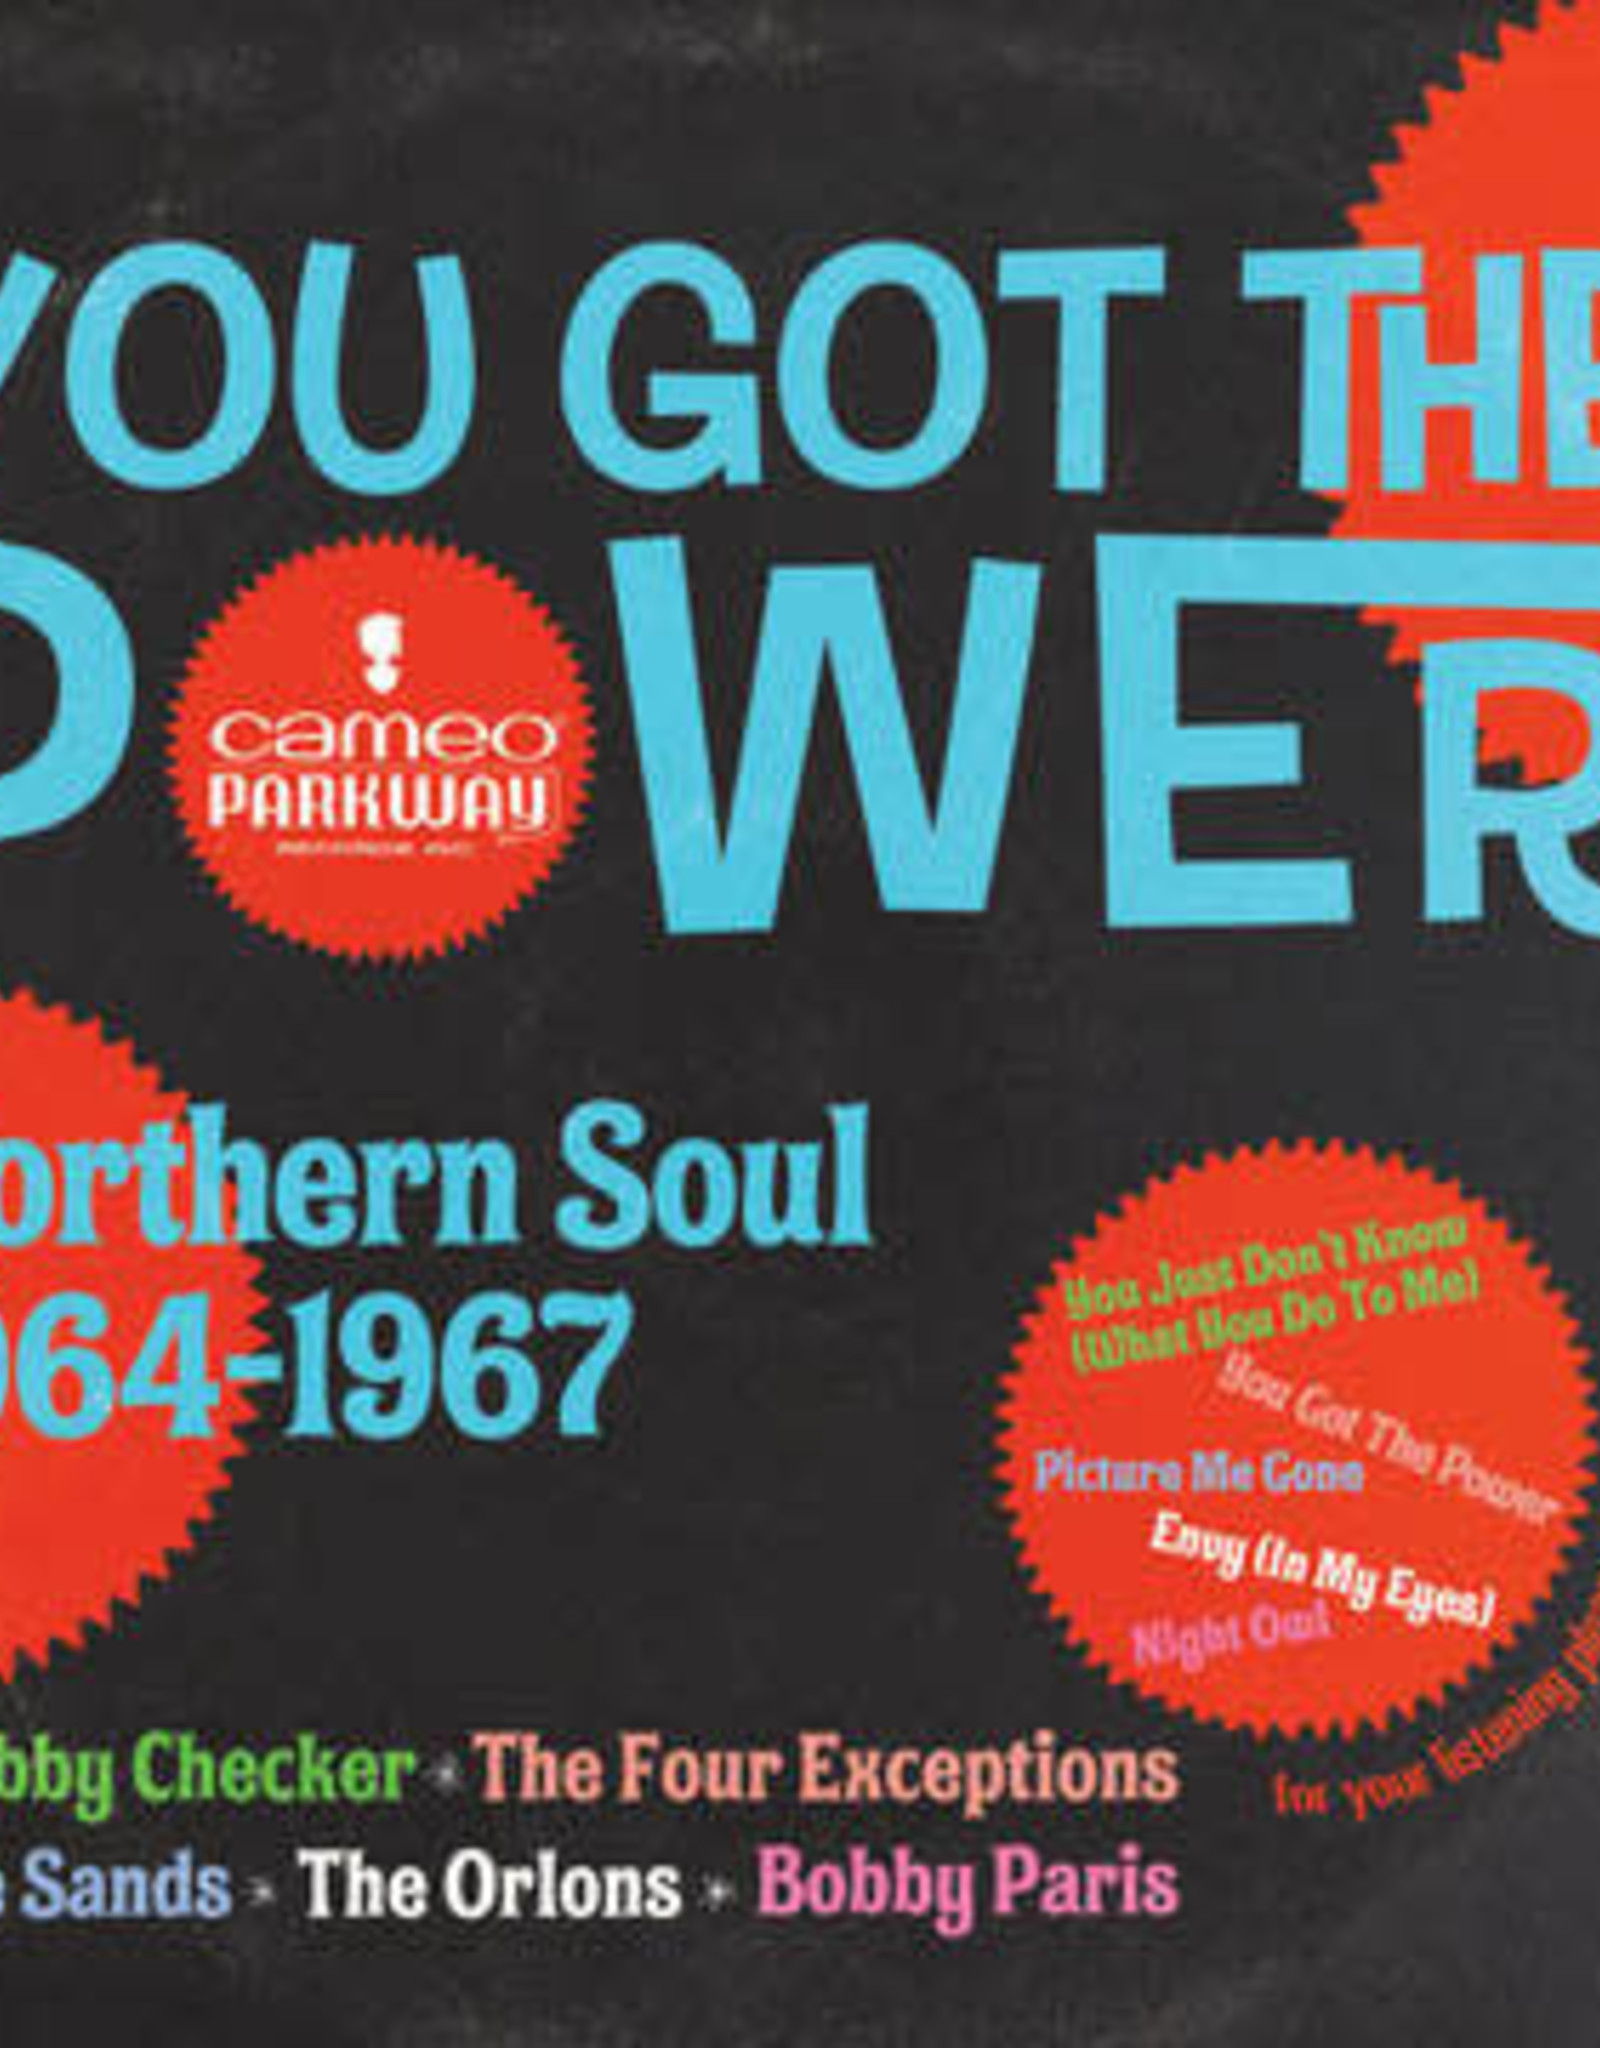 You Got The Power: Cameo Parkway Northern Soul 1964-1967 (U.K. Collection) (RSD 6/22)